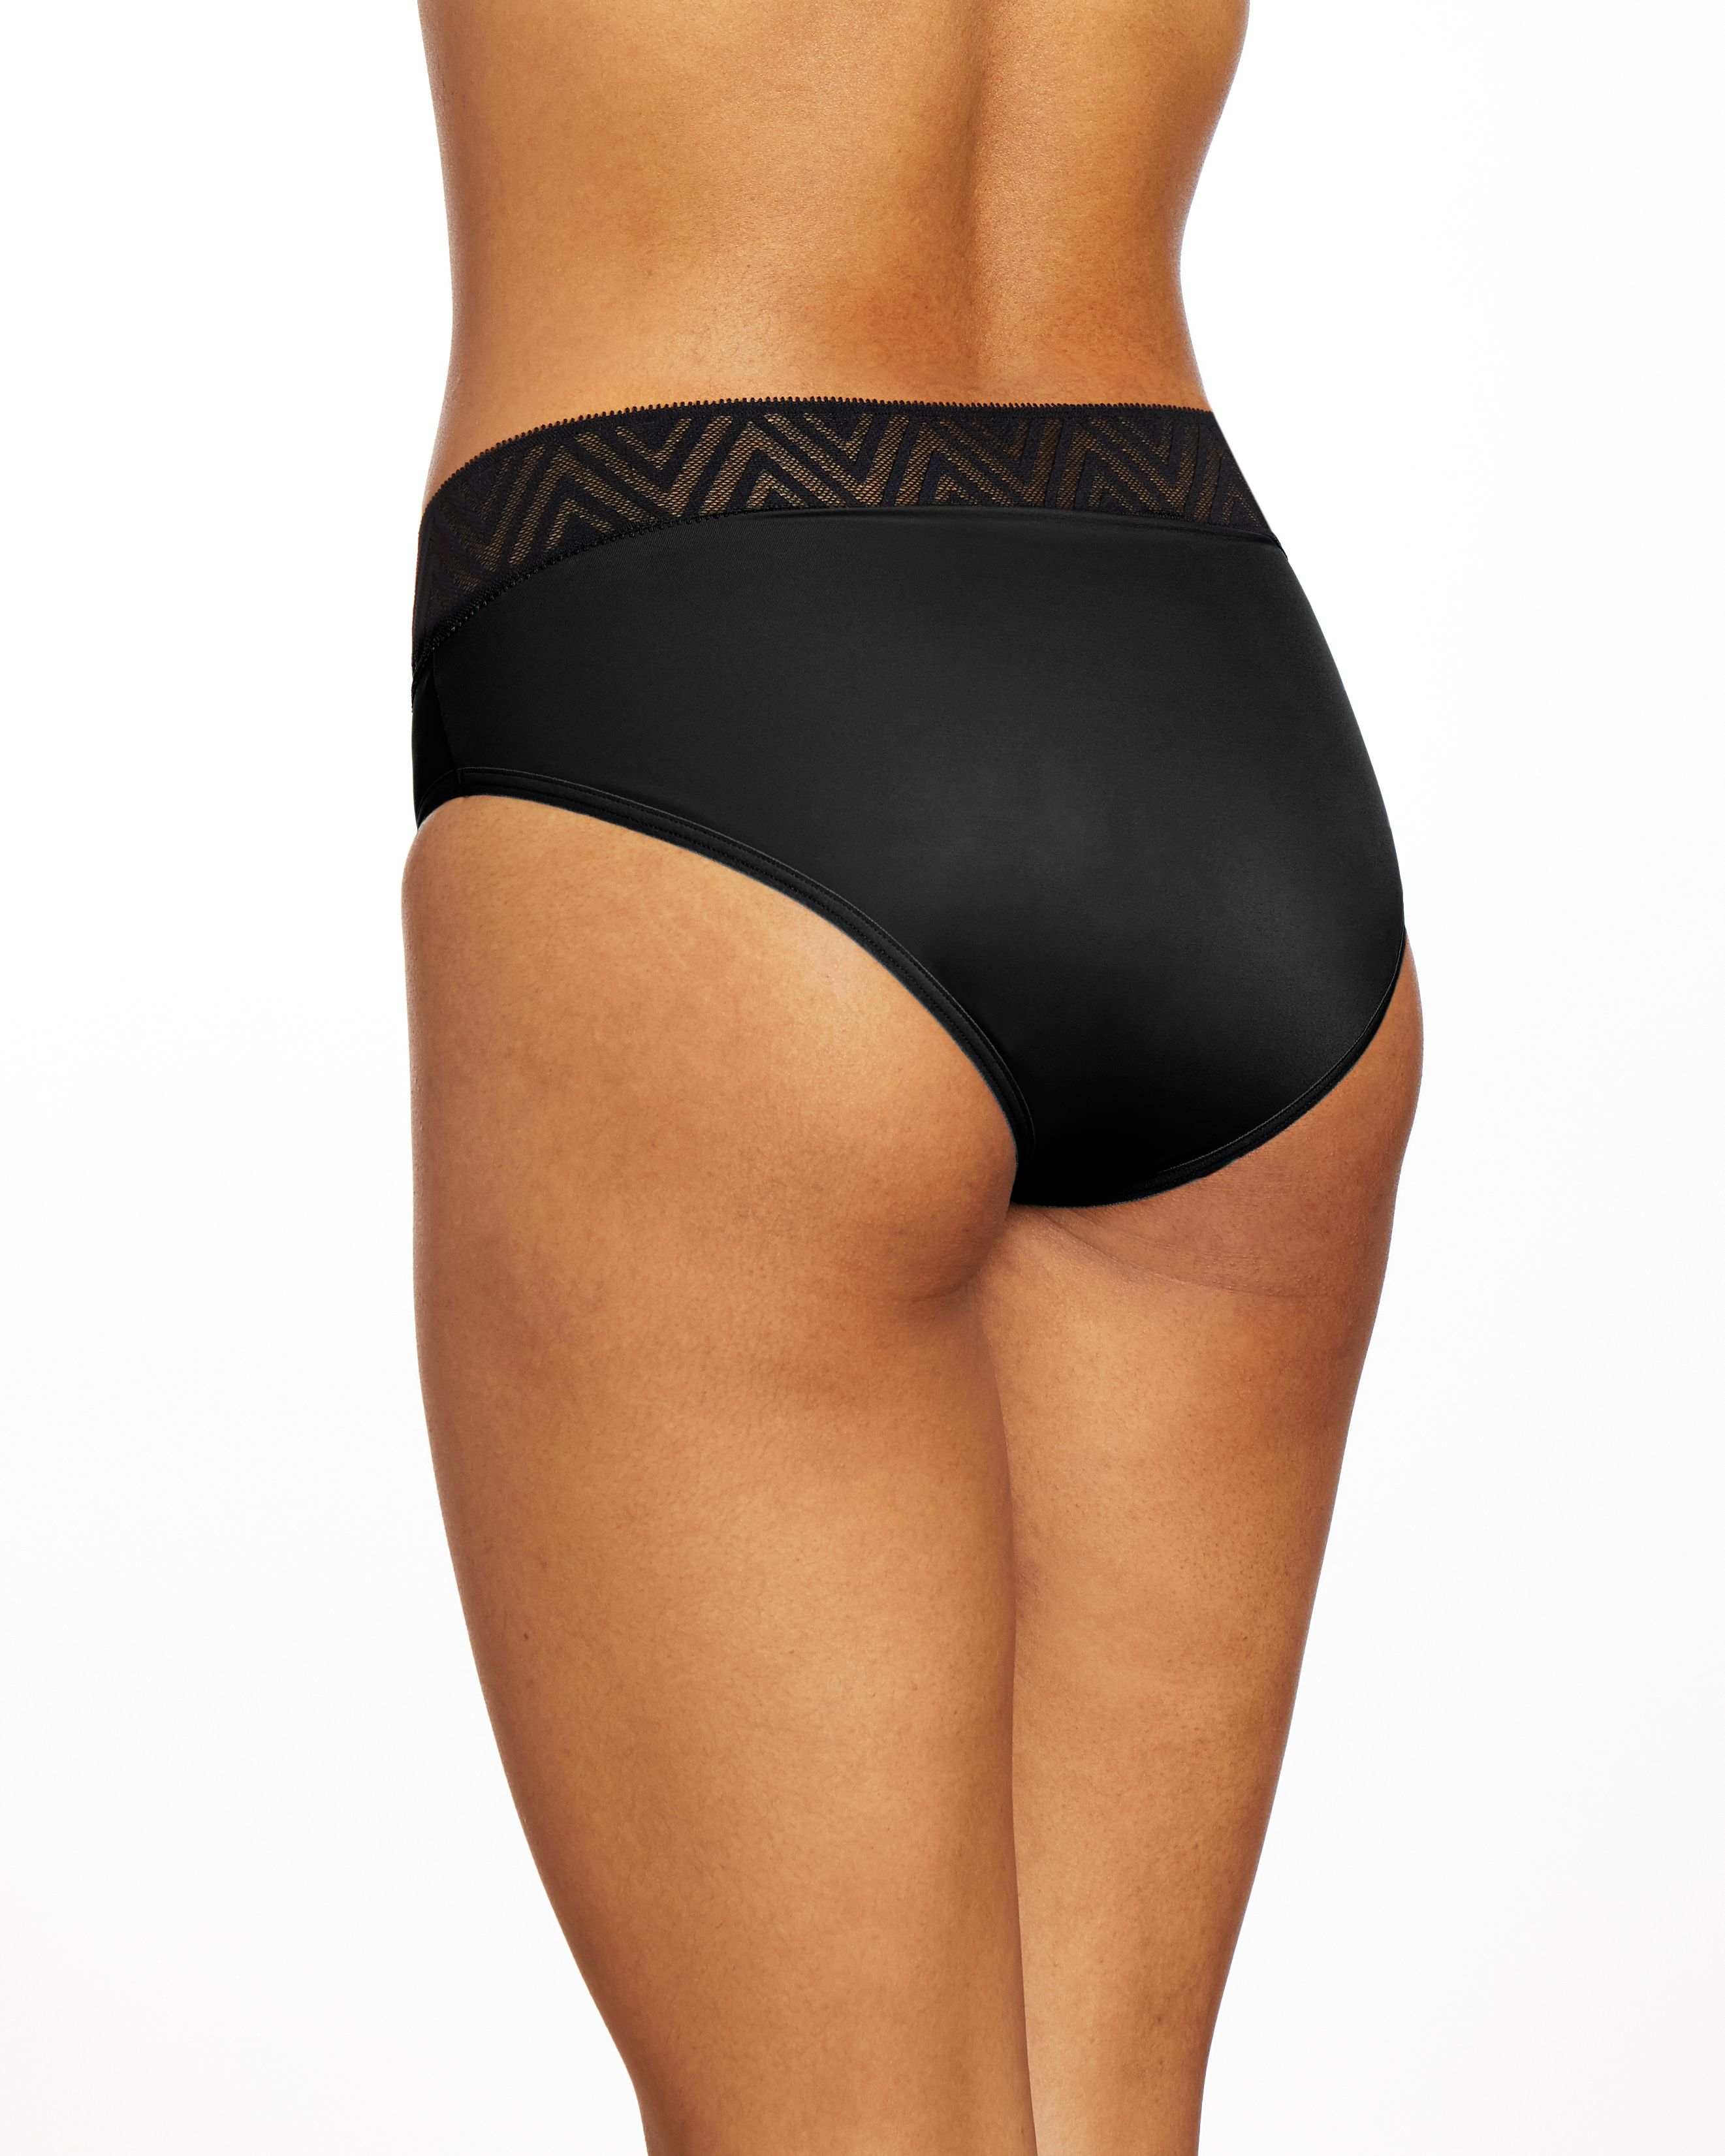 DISCThinx Period Proof Hiphugger Black - S  (New Geo Lace)